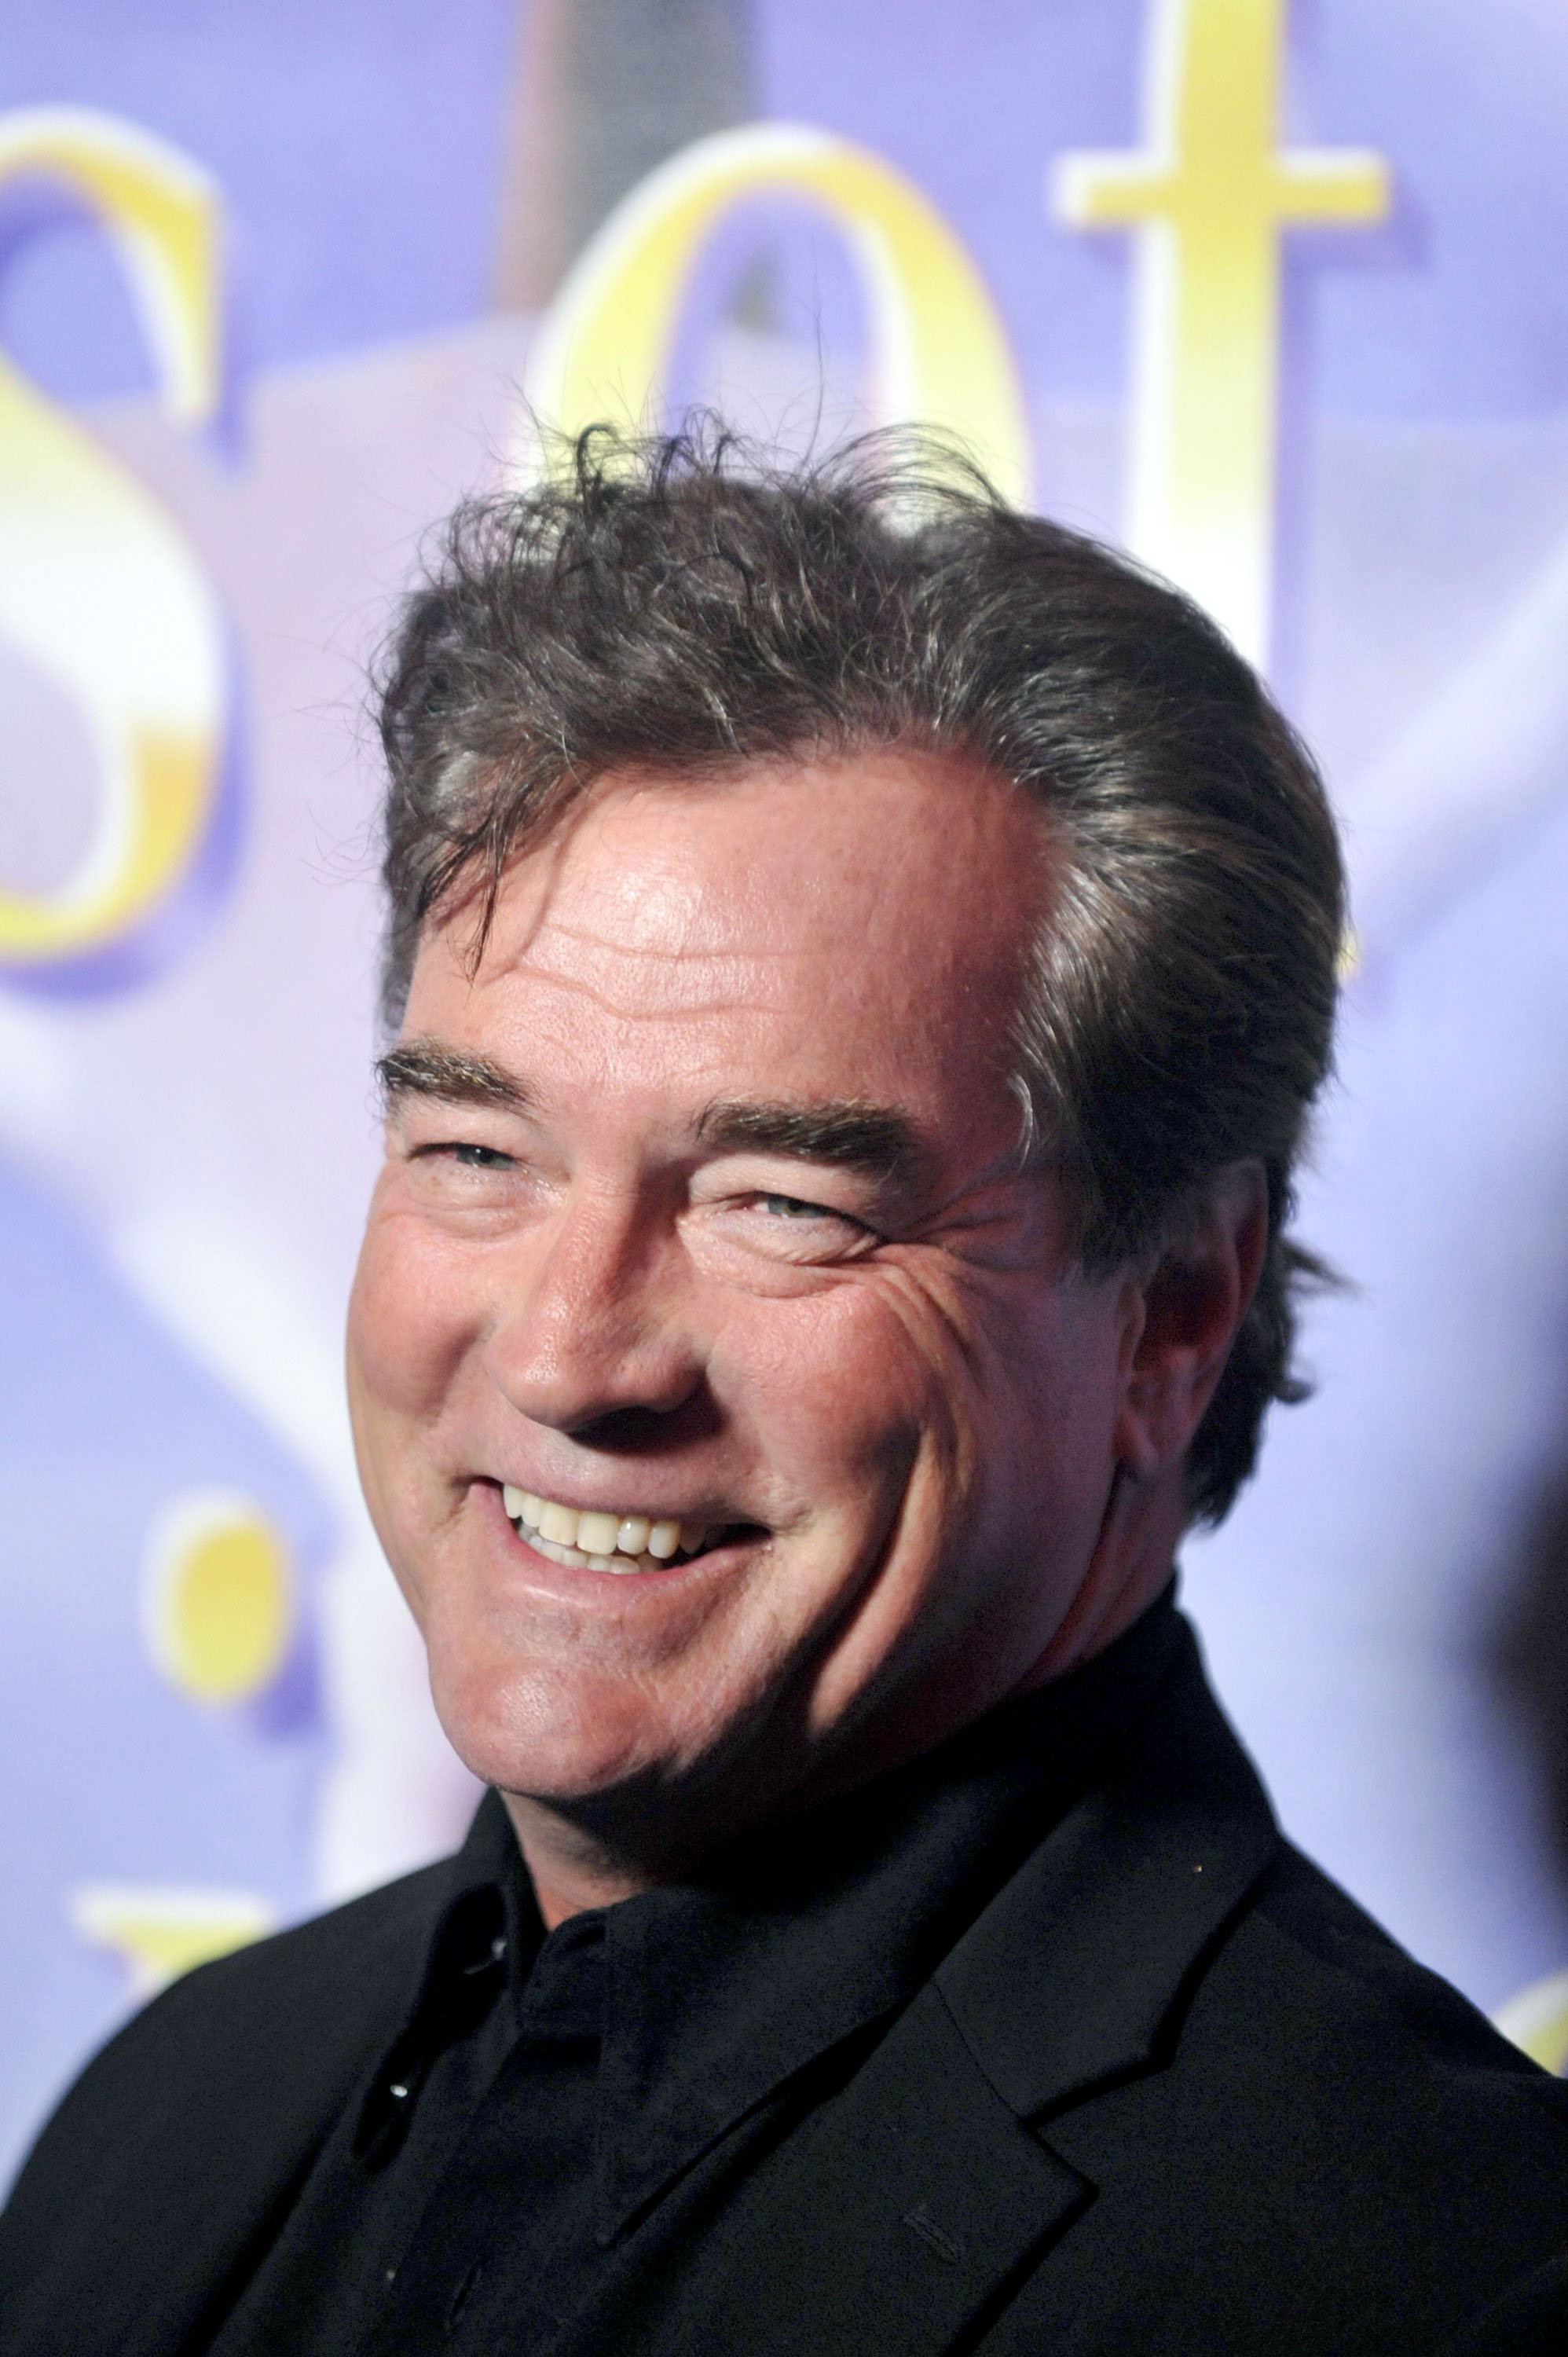 John Callahan at the "Days Of Our Lives" 45th Anniversary Party in 2010 | Source: Getty Images